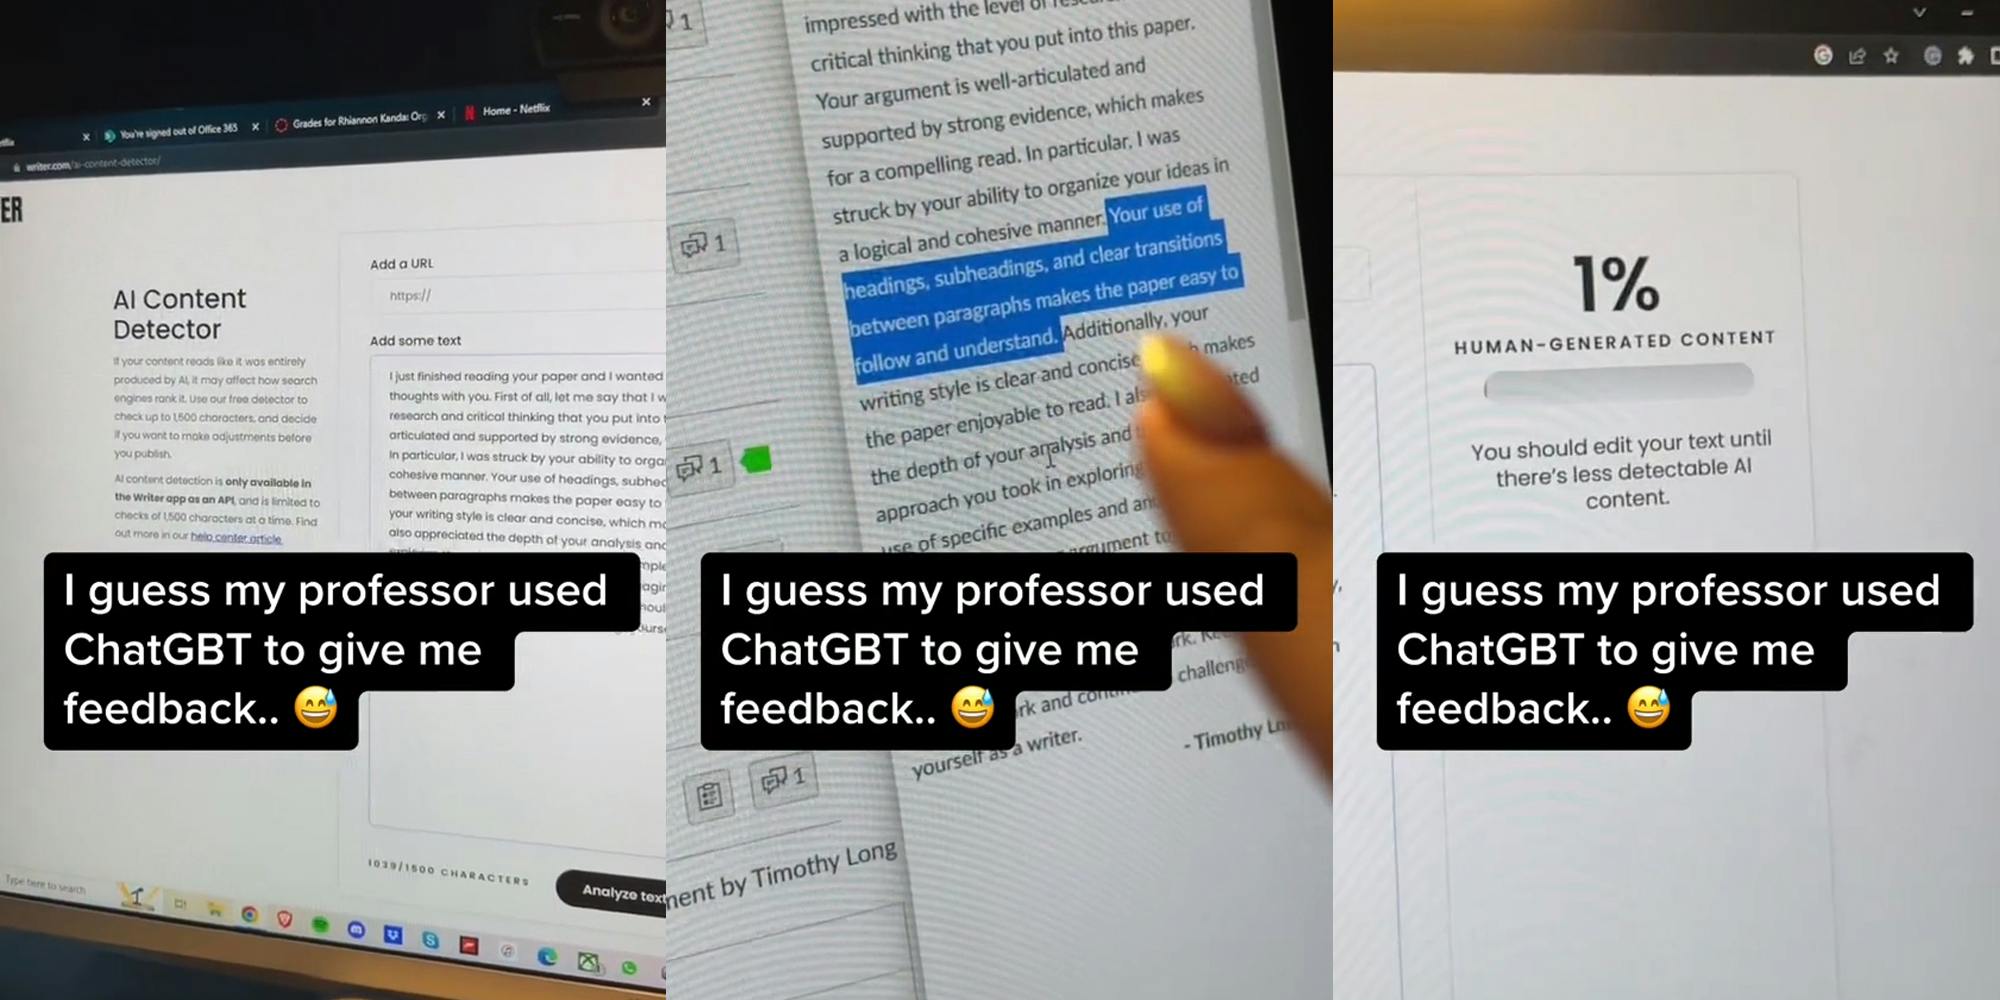 computer screen on Ai Content Detector website with caption "I guess my professor used ChatGBT to give me feedback" (l) computer screen with finger pointing to professor's grading with caption "I guess my professor used ChatGBT to give me feedback" (c) 1% human generated content on computer screen with caption "I guess my professor used ChatGBT to give me feedback" (r)